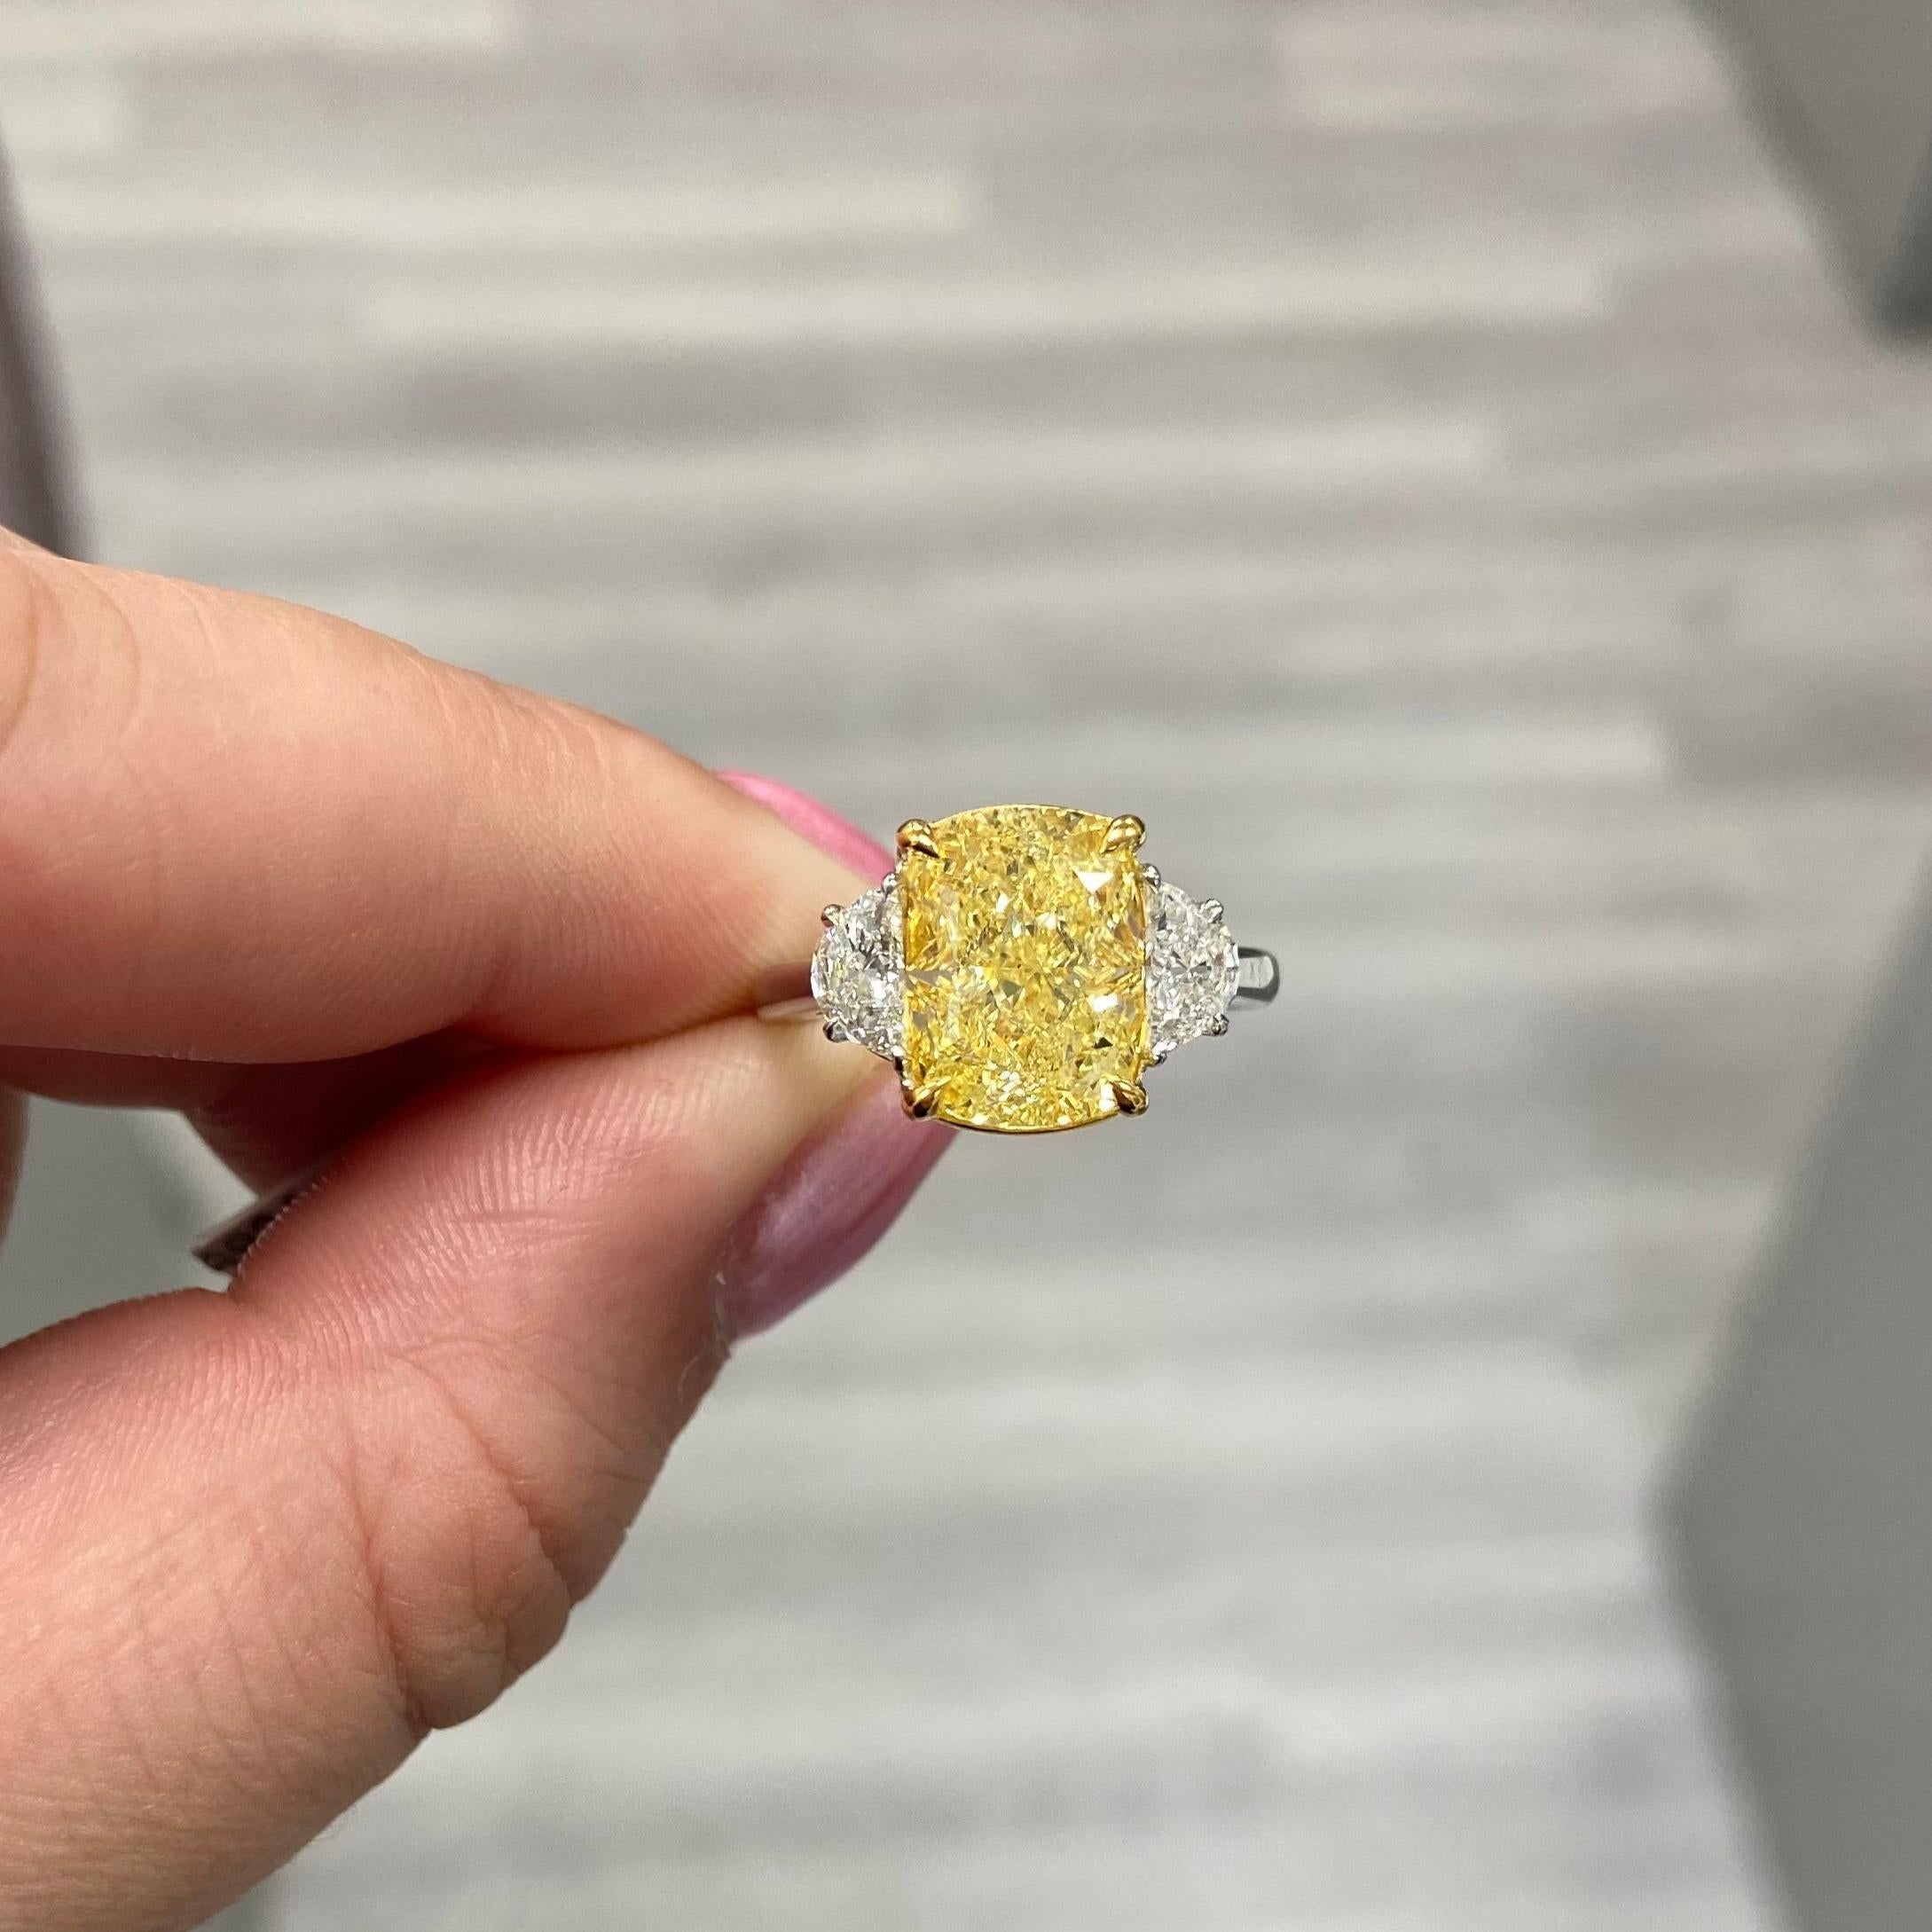 Very well laid out 5ct rectangular cushion Fancy Yellow VVS set in a handmade platinum ring topped with  18 karat yellow gold with a pair of 0.59ct total weight Half Moons F VS quality.
Very lively and charming piece.
This piece can be viewed before